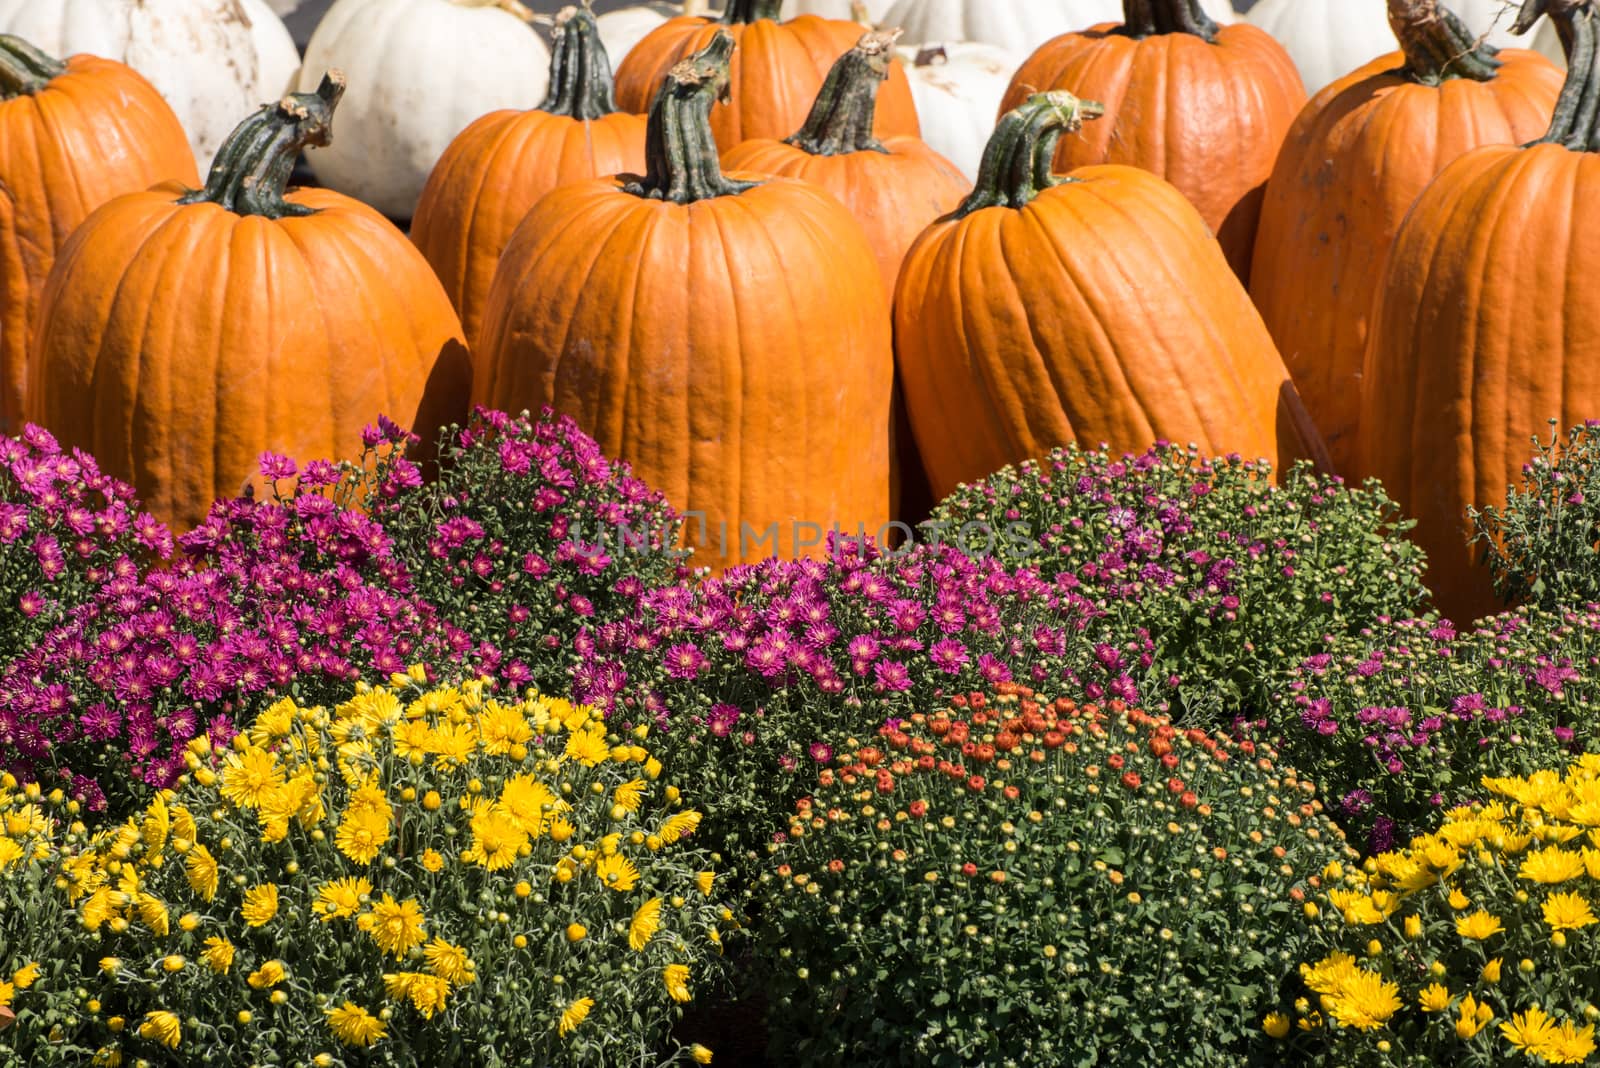 Orange and white pumpkins with fall chrysanthemums. 